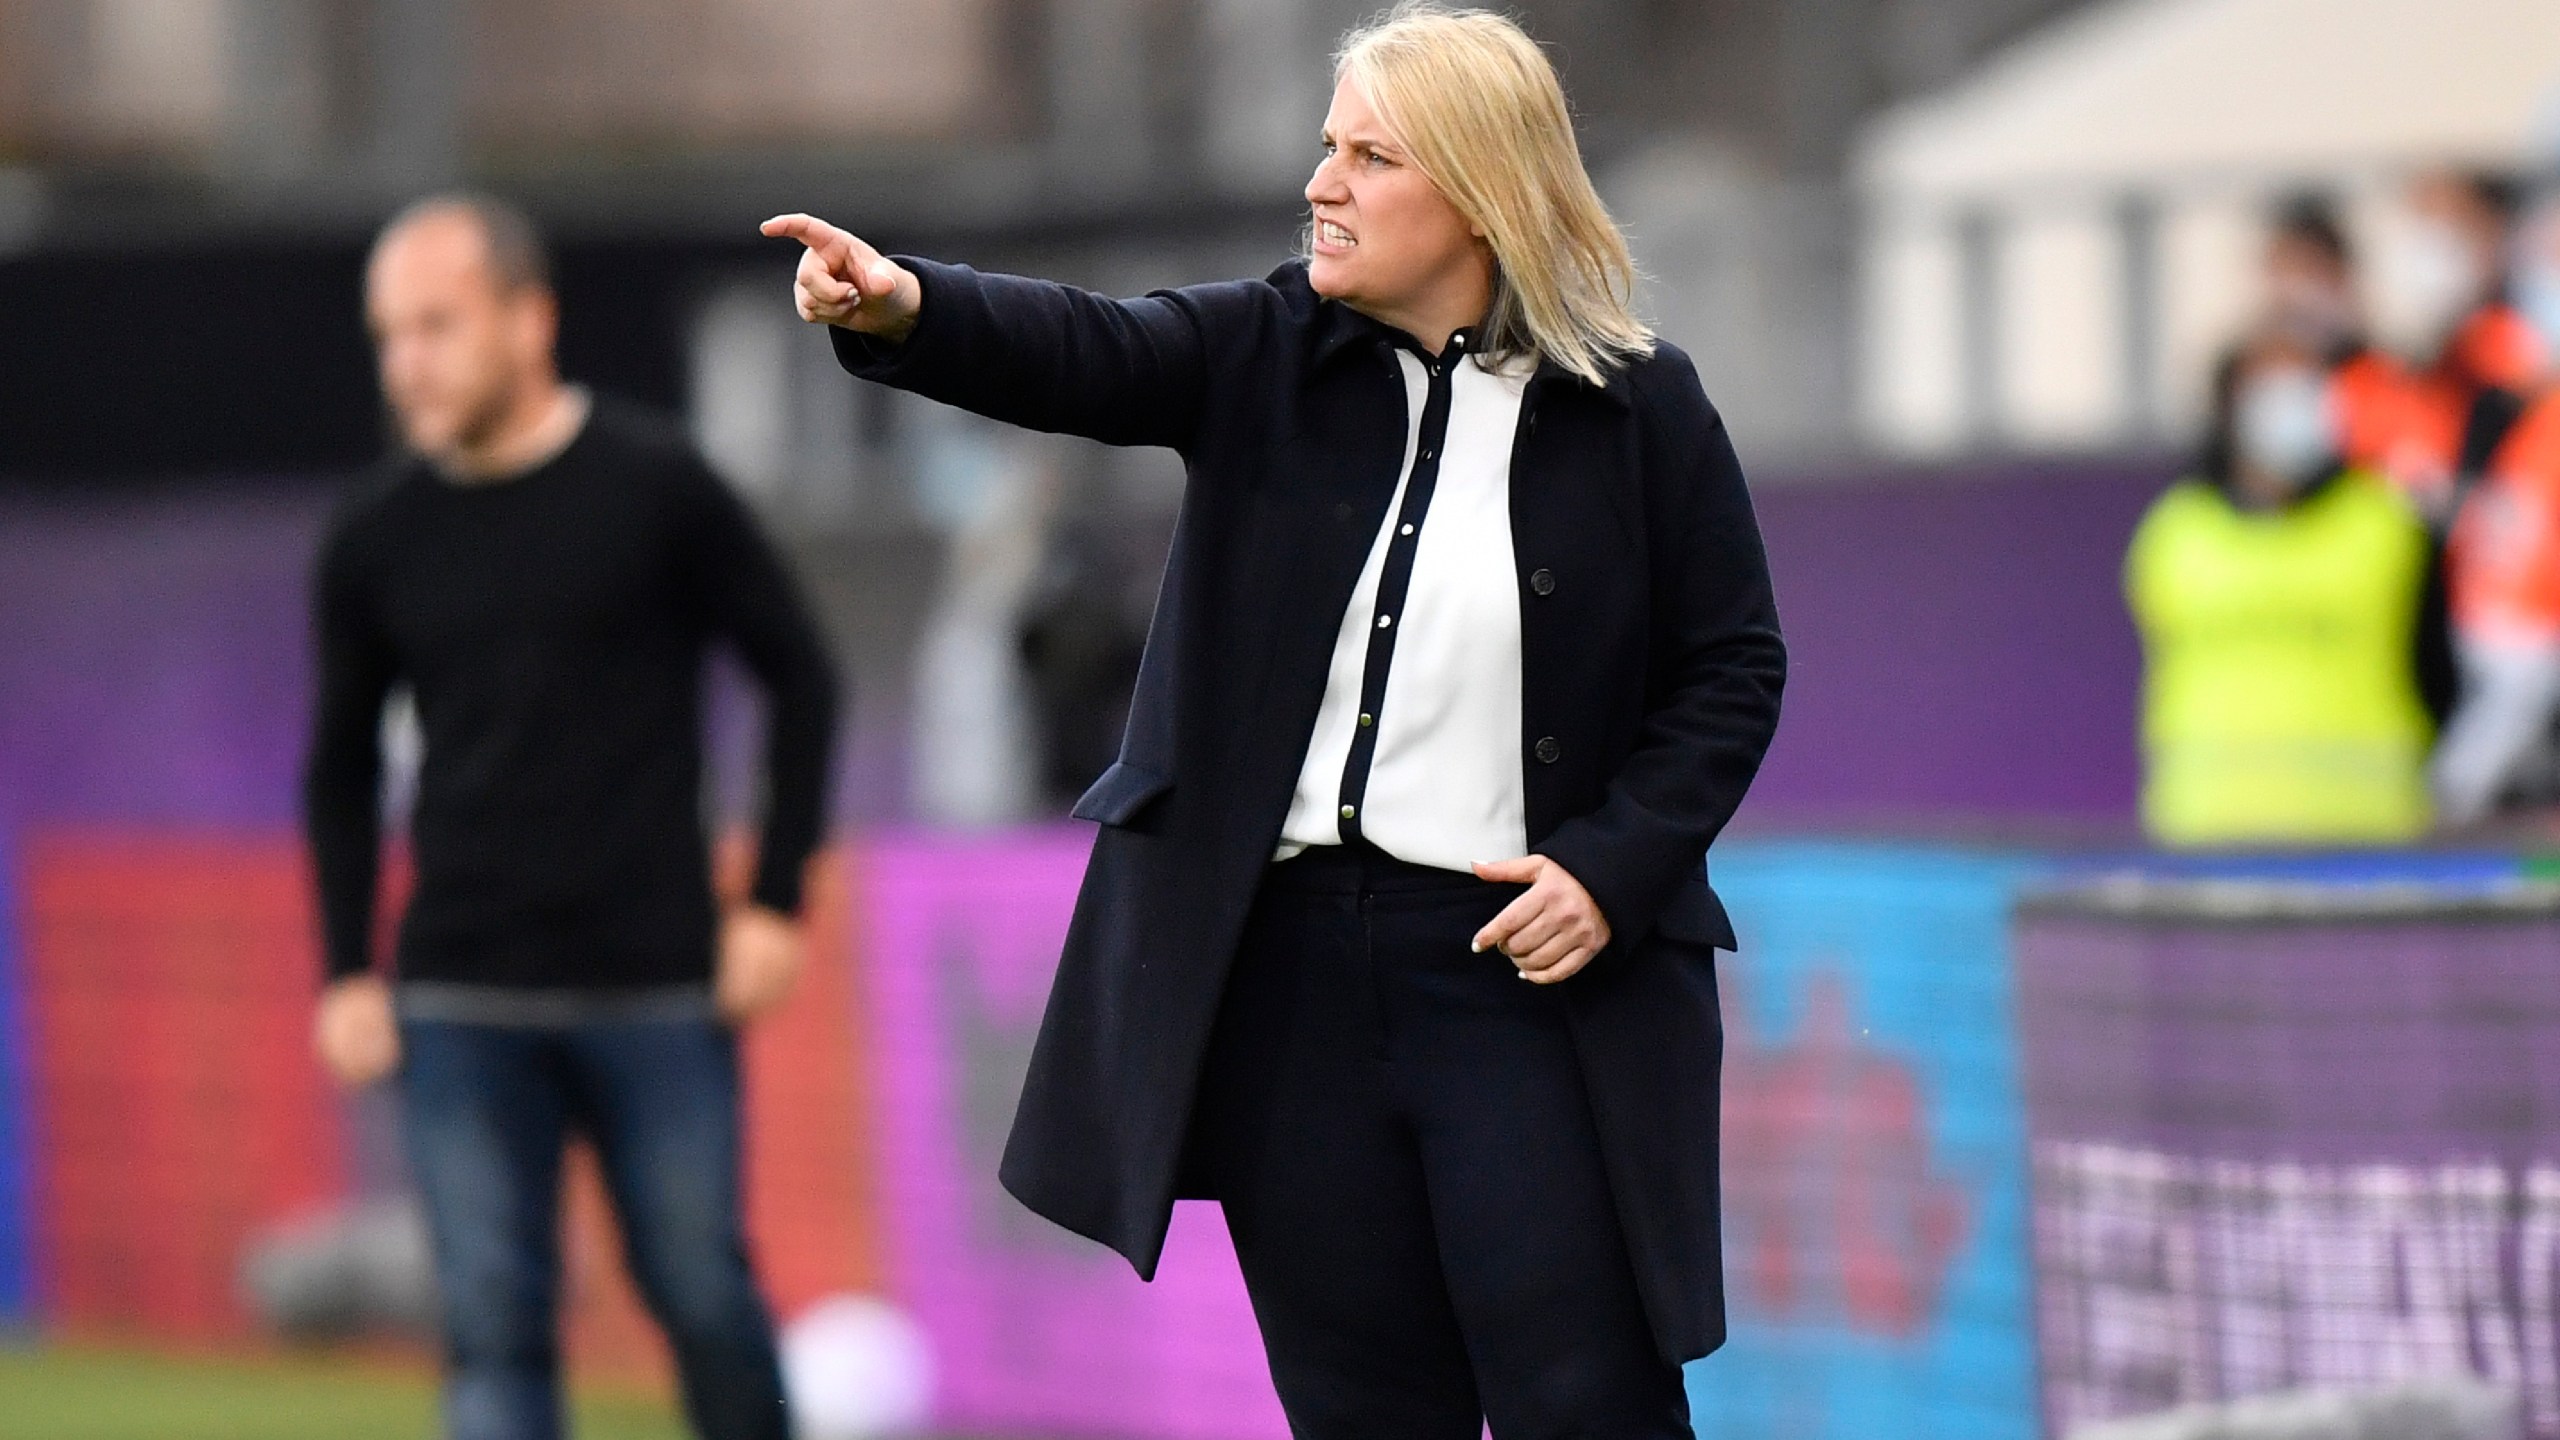 FILE - Chelsea's coach Emma Hayes directs her team during the UEFA Women's Champions League final soccer match between Chelsea FC and FC Barcelona in Gothenburg, Sweden, on May 16, 2021. New U.S. women's coach Emma Hayes will make her debut with the national team in a pair of exhibition matches against South Korea in June. The United States on Tuesday, March 5, 2024, announced a June 1 match at Dick's Sporting Good Park in Commerce City, Colorado, and a June 4 match at Allianz Field in St. Paul, Minnesota. (AP Photo/Martin Meissner, File)